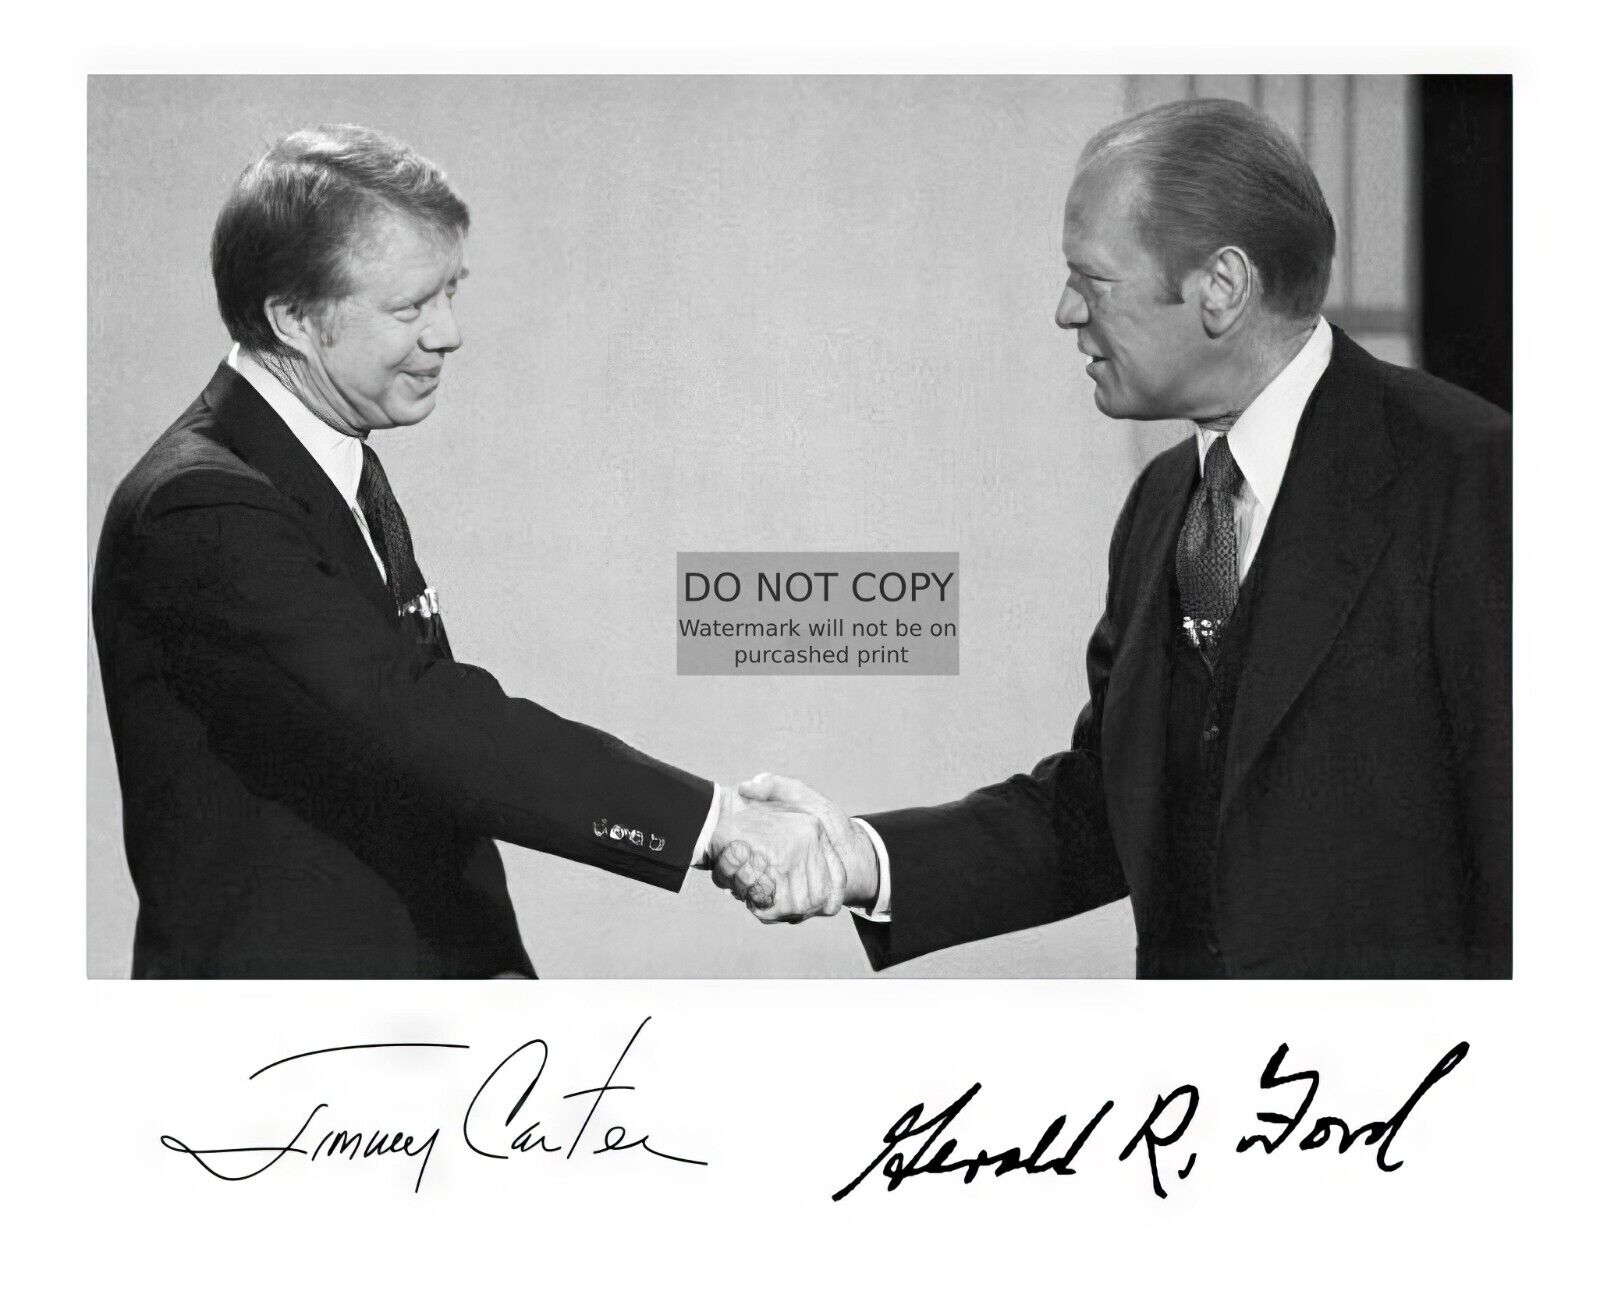 PRESIDENT JIMMY CARTER AND GERALD FORD SHAKING HANDS AUTOGRAPHED 8X10 PHOTO